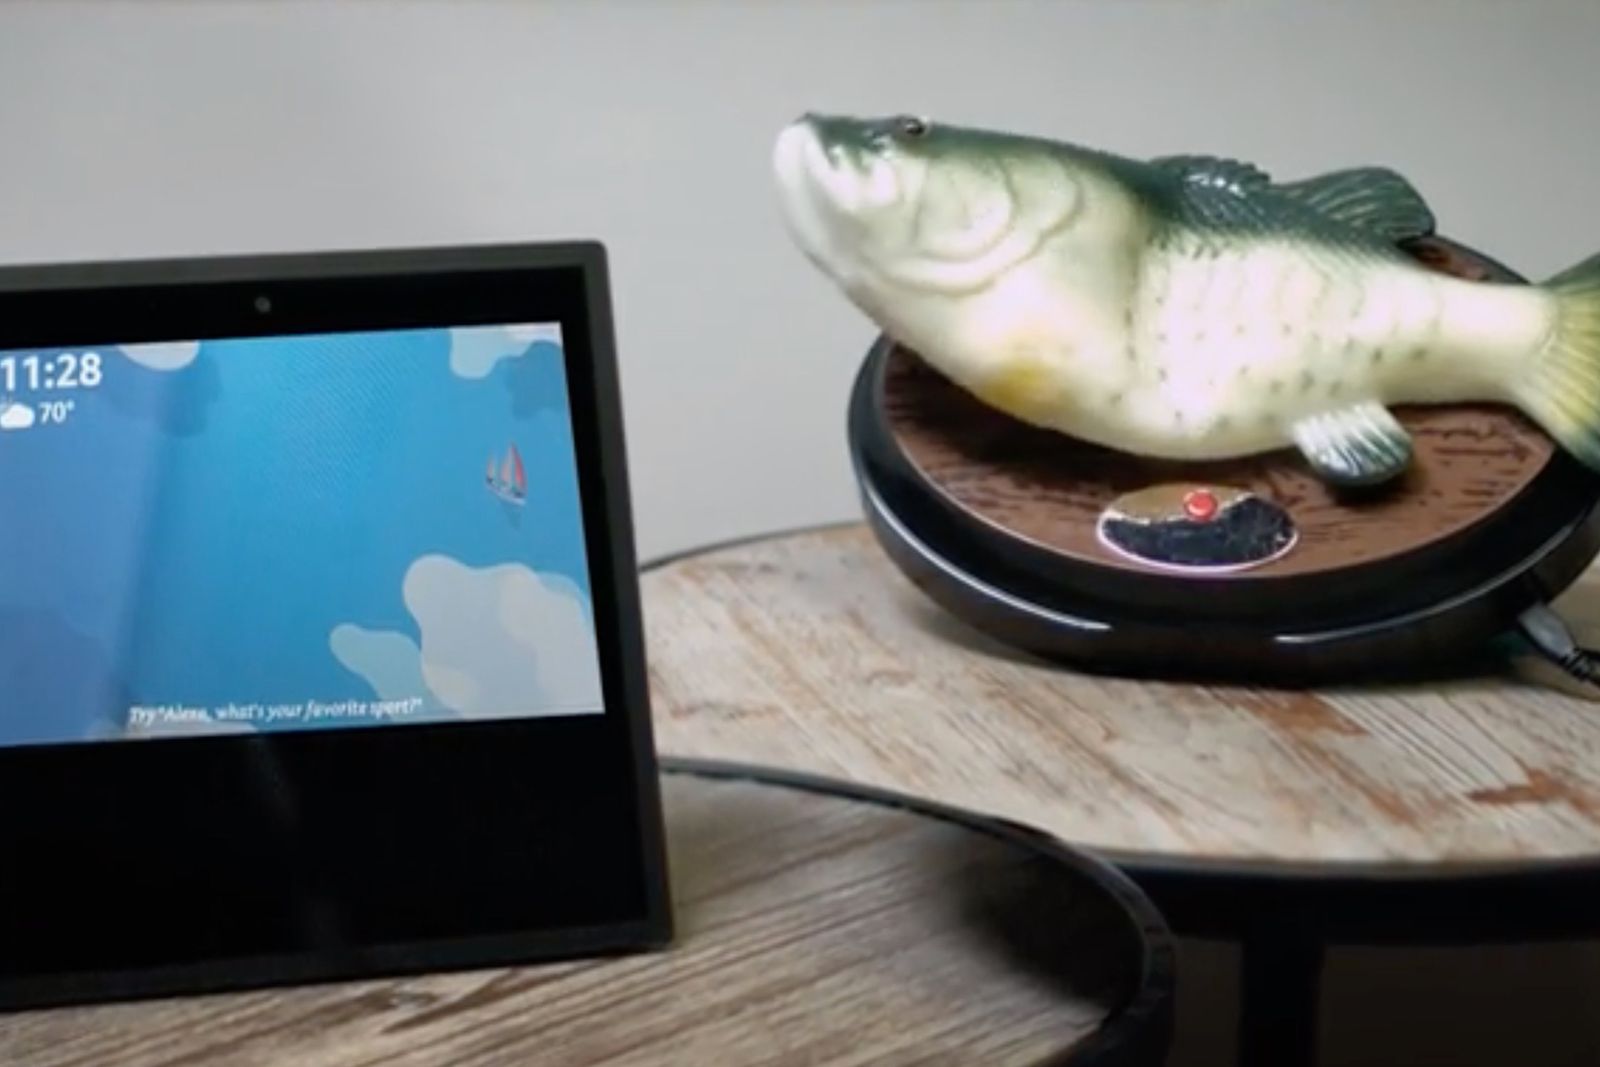 Big Mouth Billy Bass Is Now A 40 Alexa Device image 3